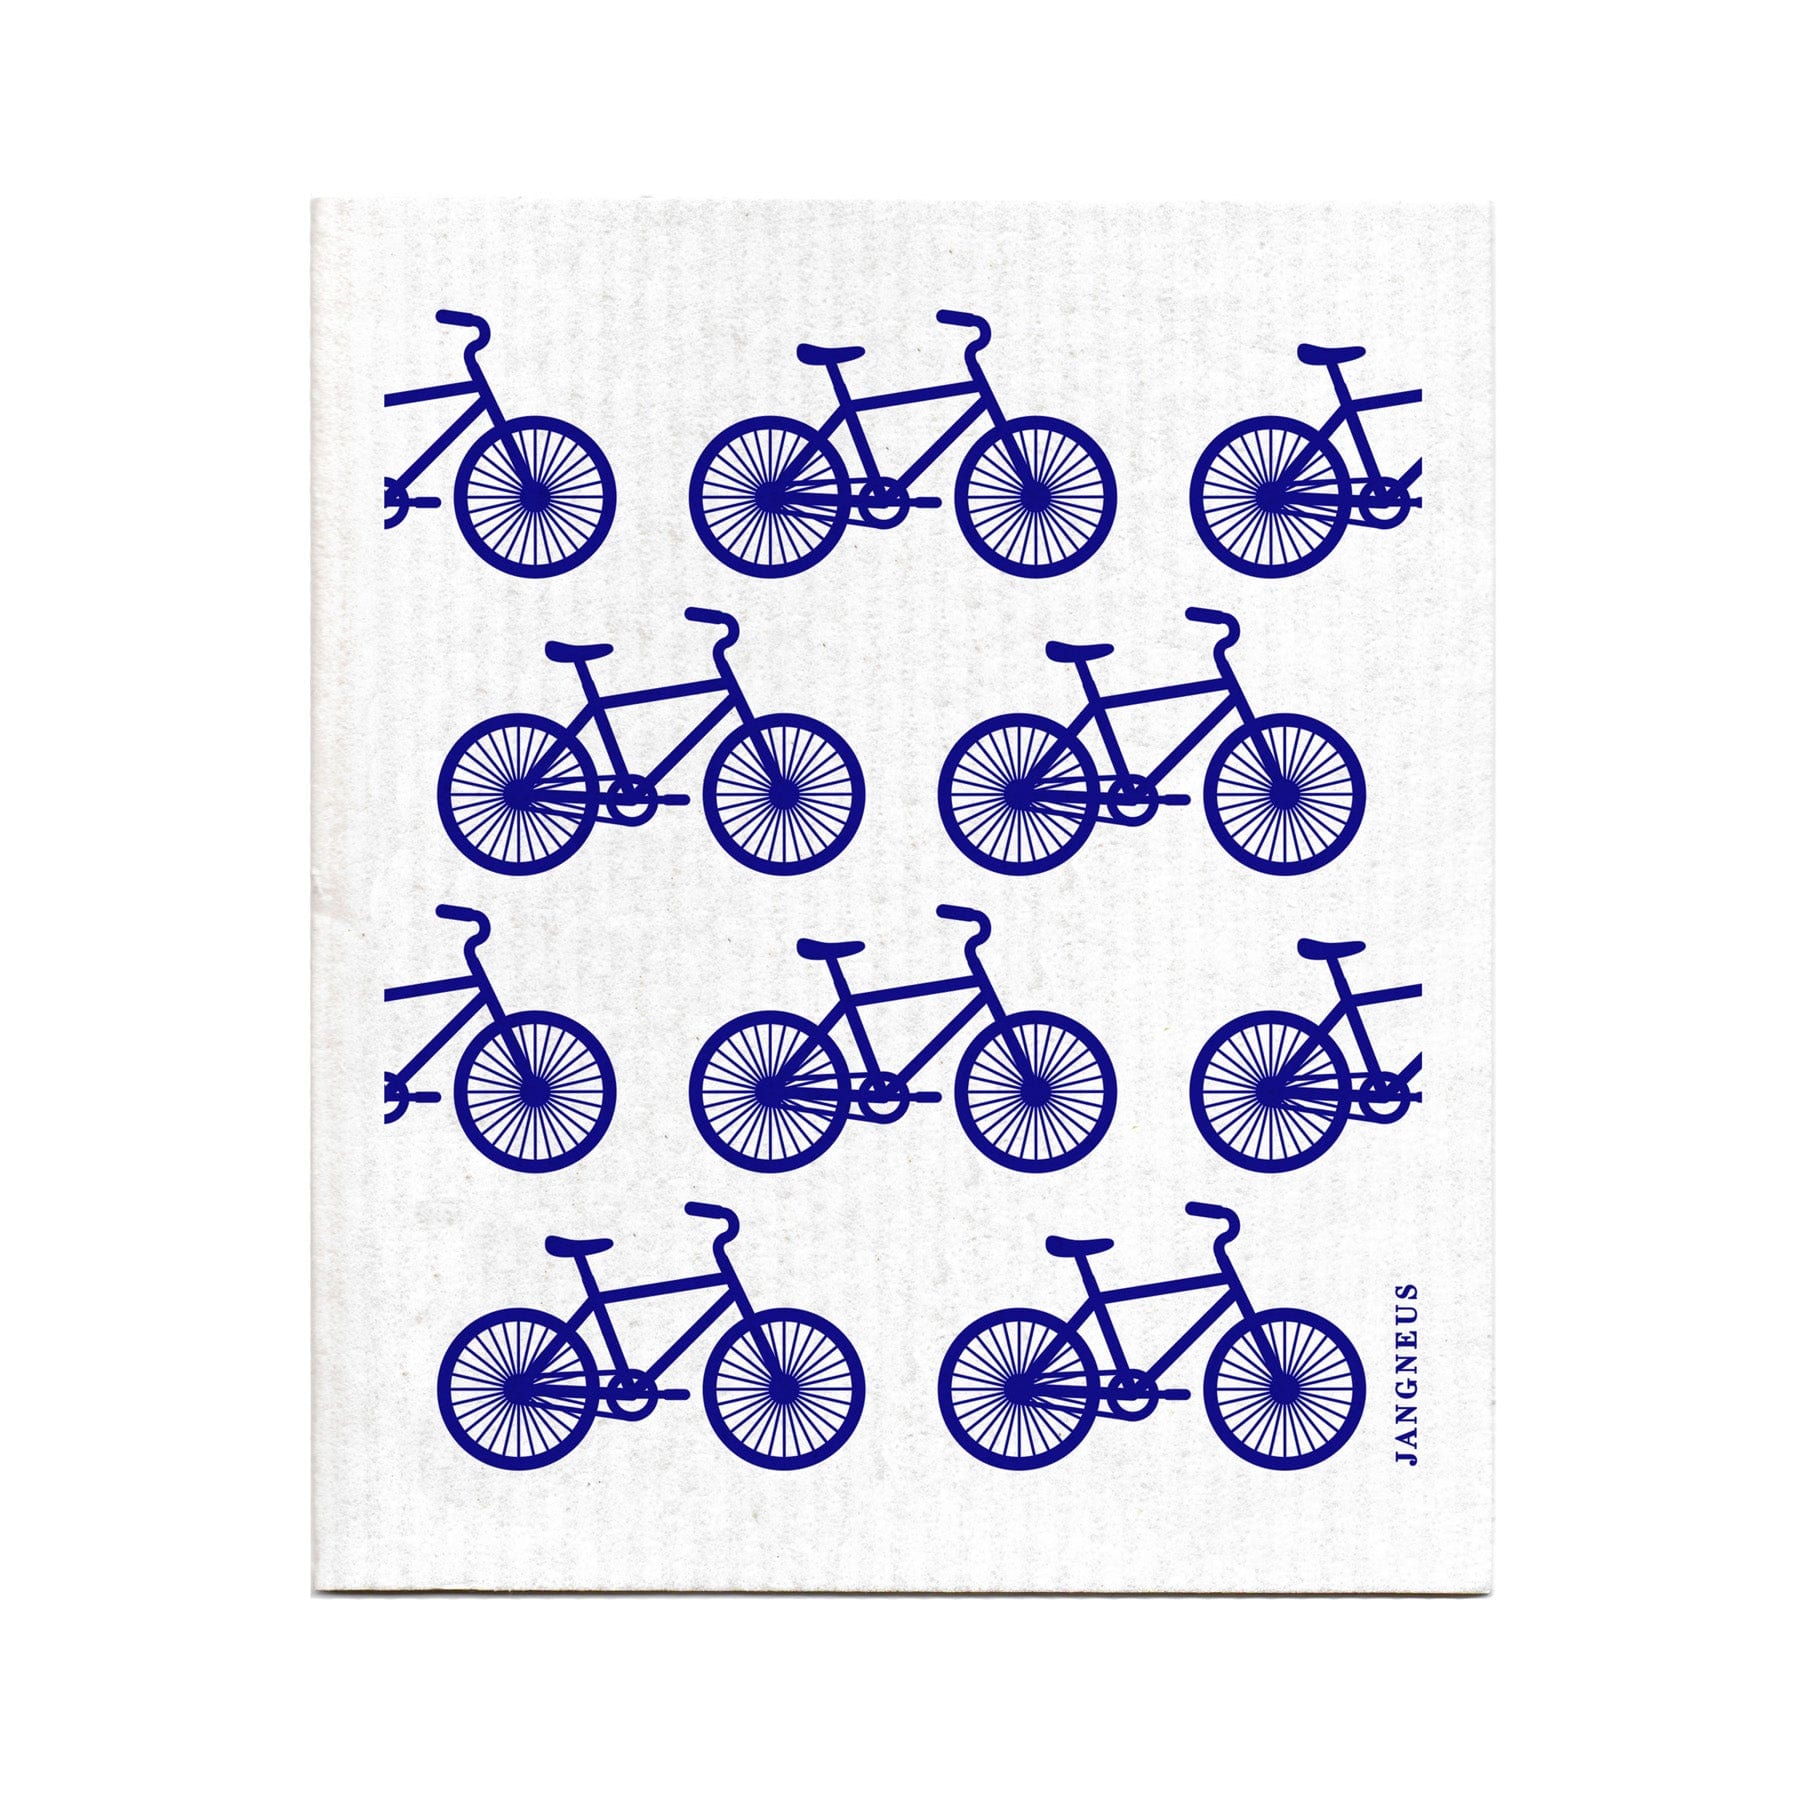 Alt text: Patterned fabric featuring blue bicycle print designs arranged in rows on a white background with visible linen texture, labeled 'Jancycles' at the bottom right corner.